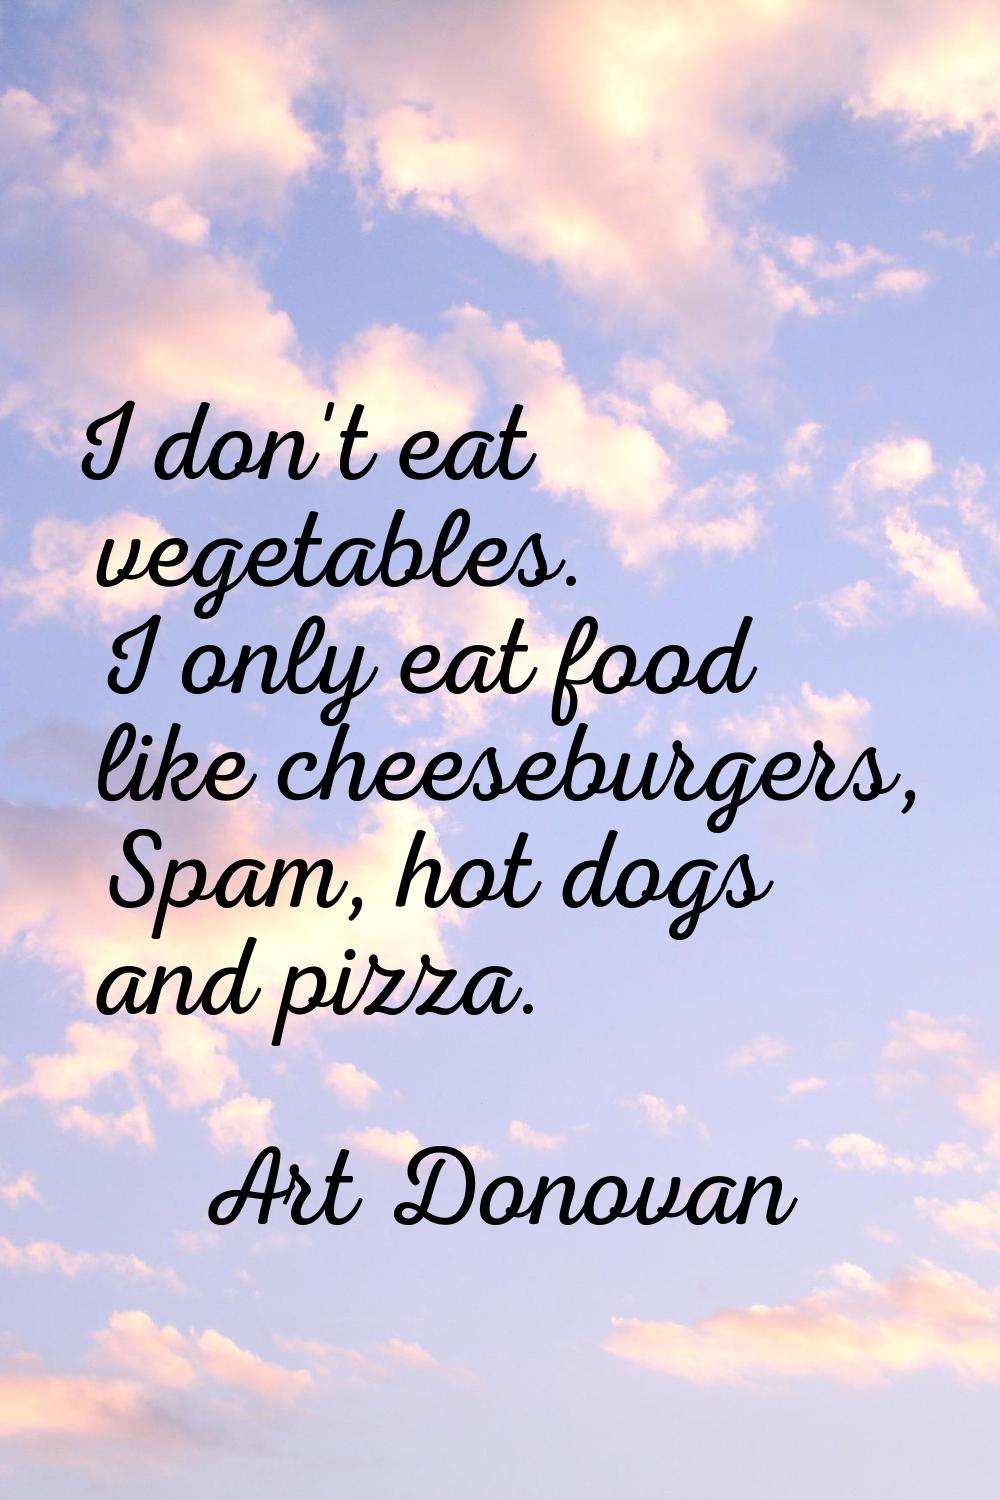 I don't eat vegetables. I only eat food like cheeseburgers, Spam, hot dogs and pizza.